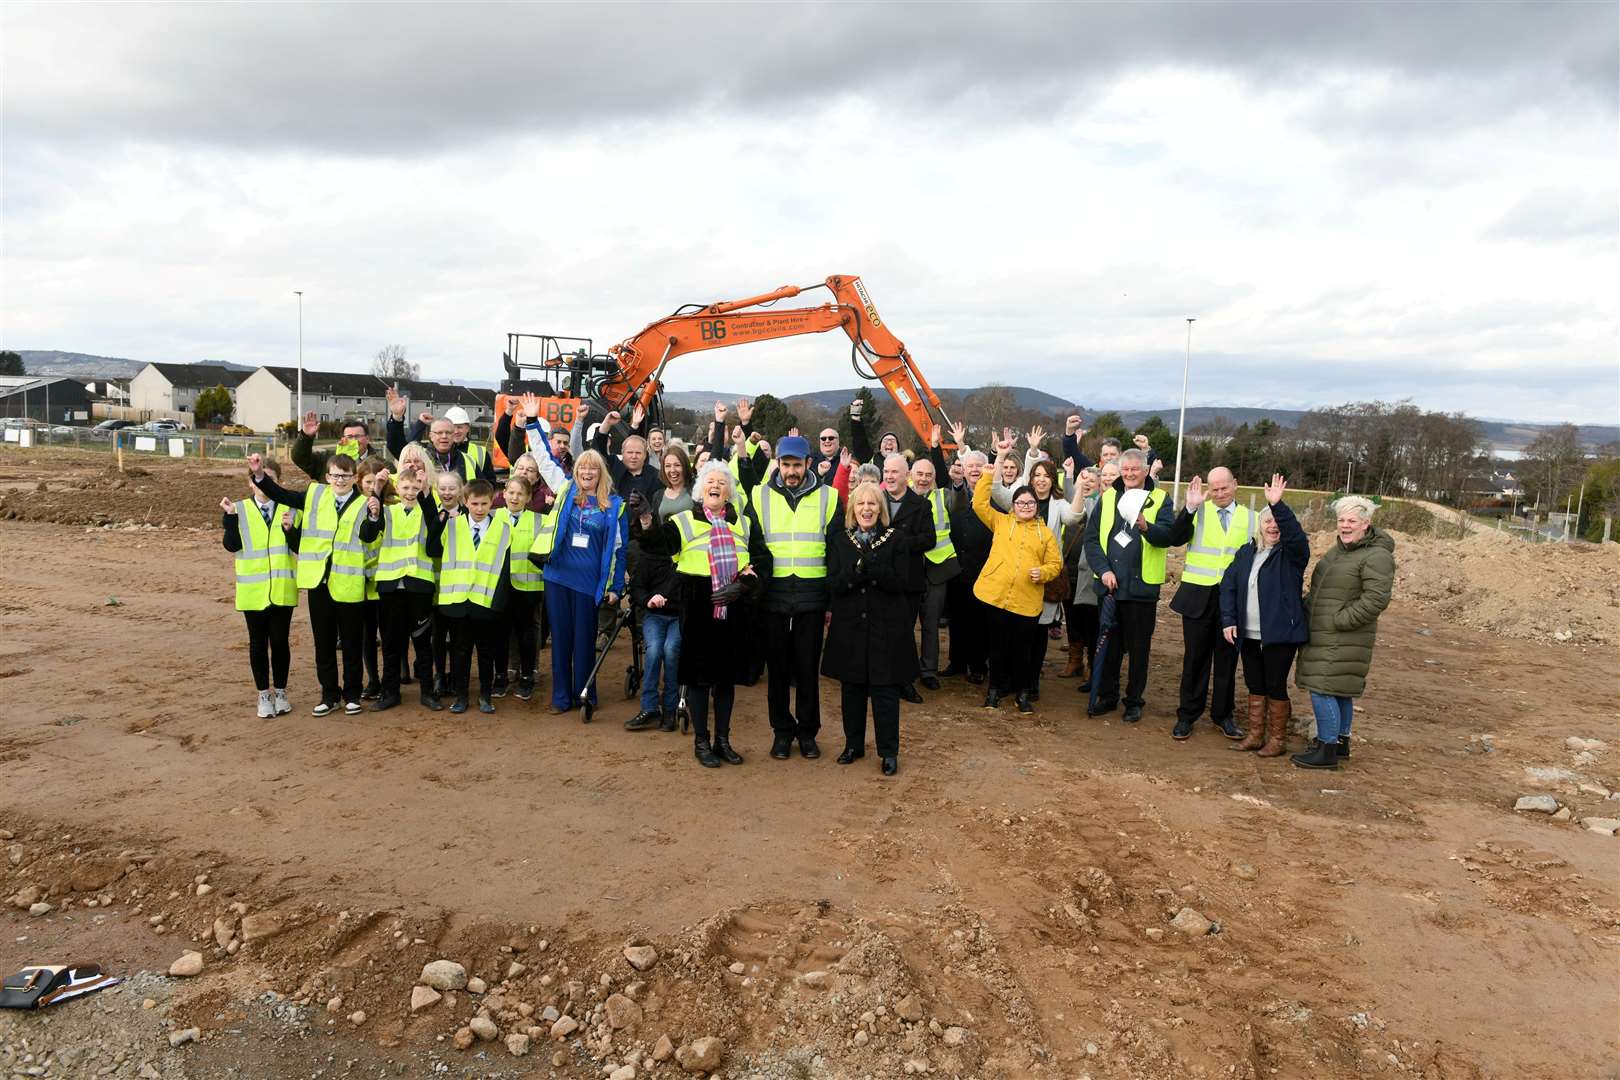 Construction work on the Haven Centre for children and young people in the Highlands with learning difficulties and complex needs began at the Smithton site in March.